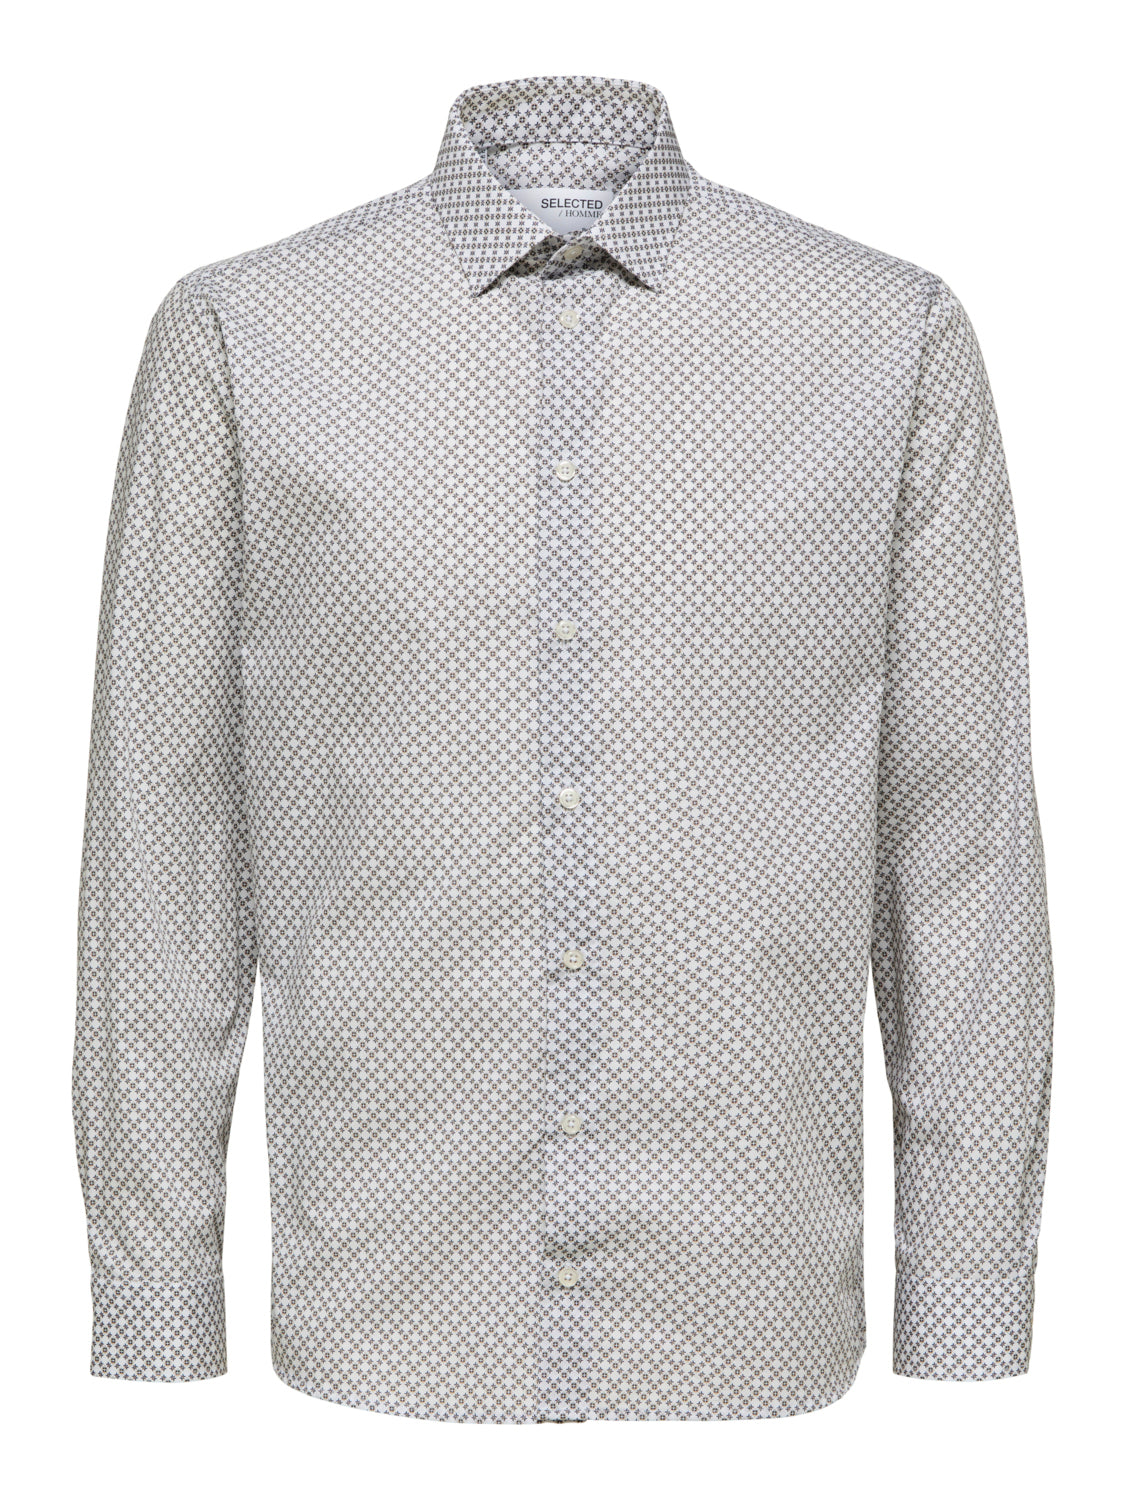 SELECTED HOMME - REG-ODIN Shirts - Bright White